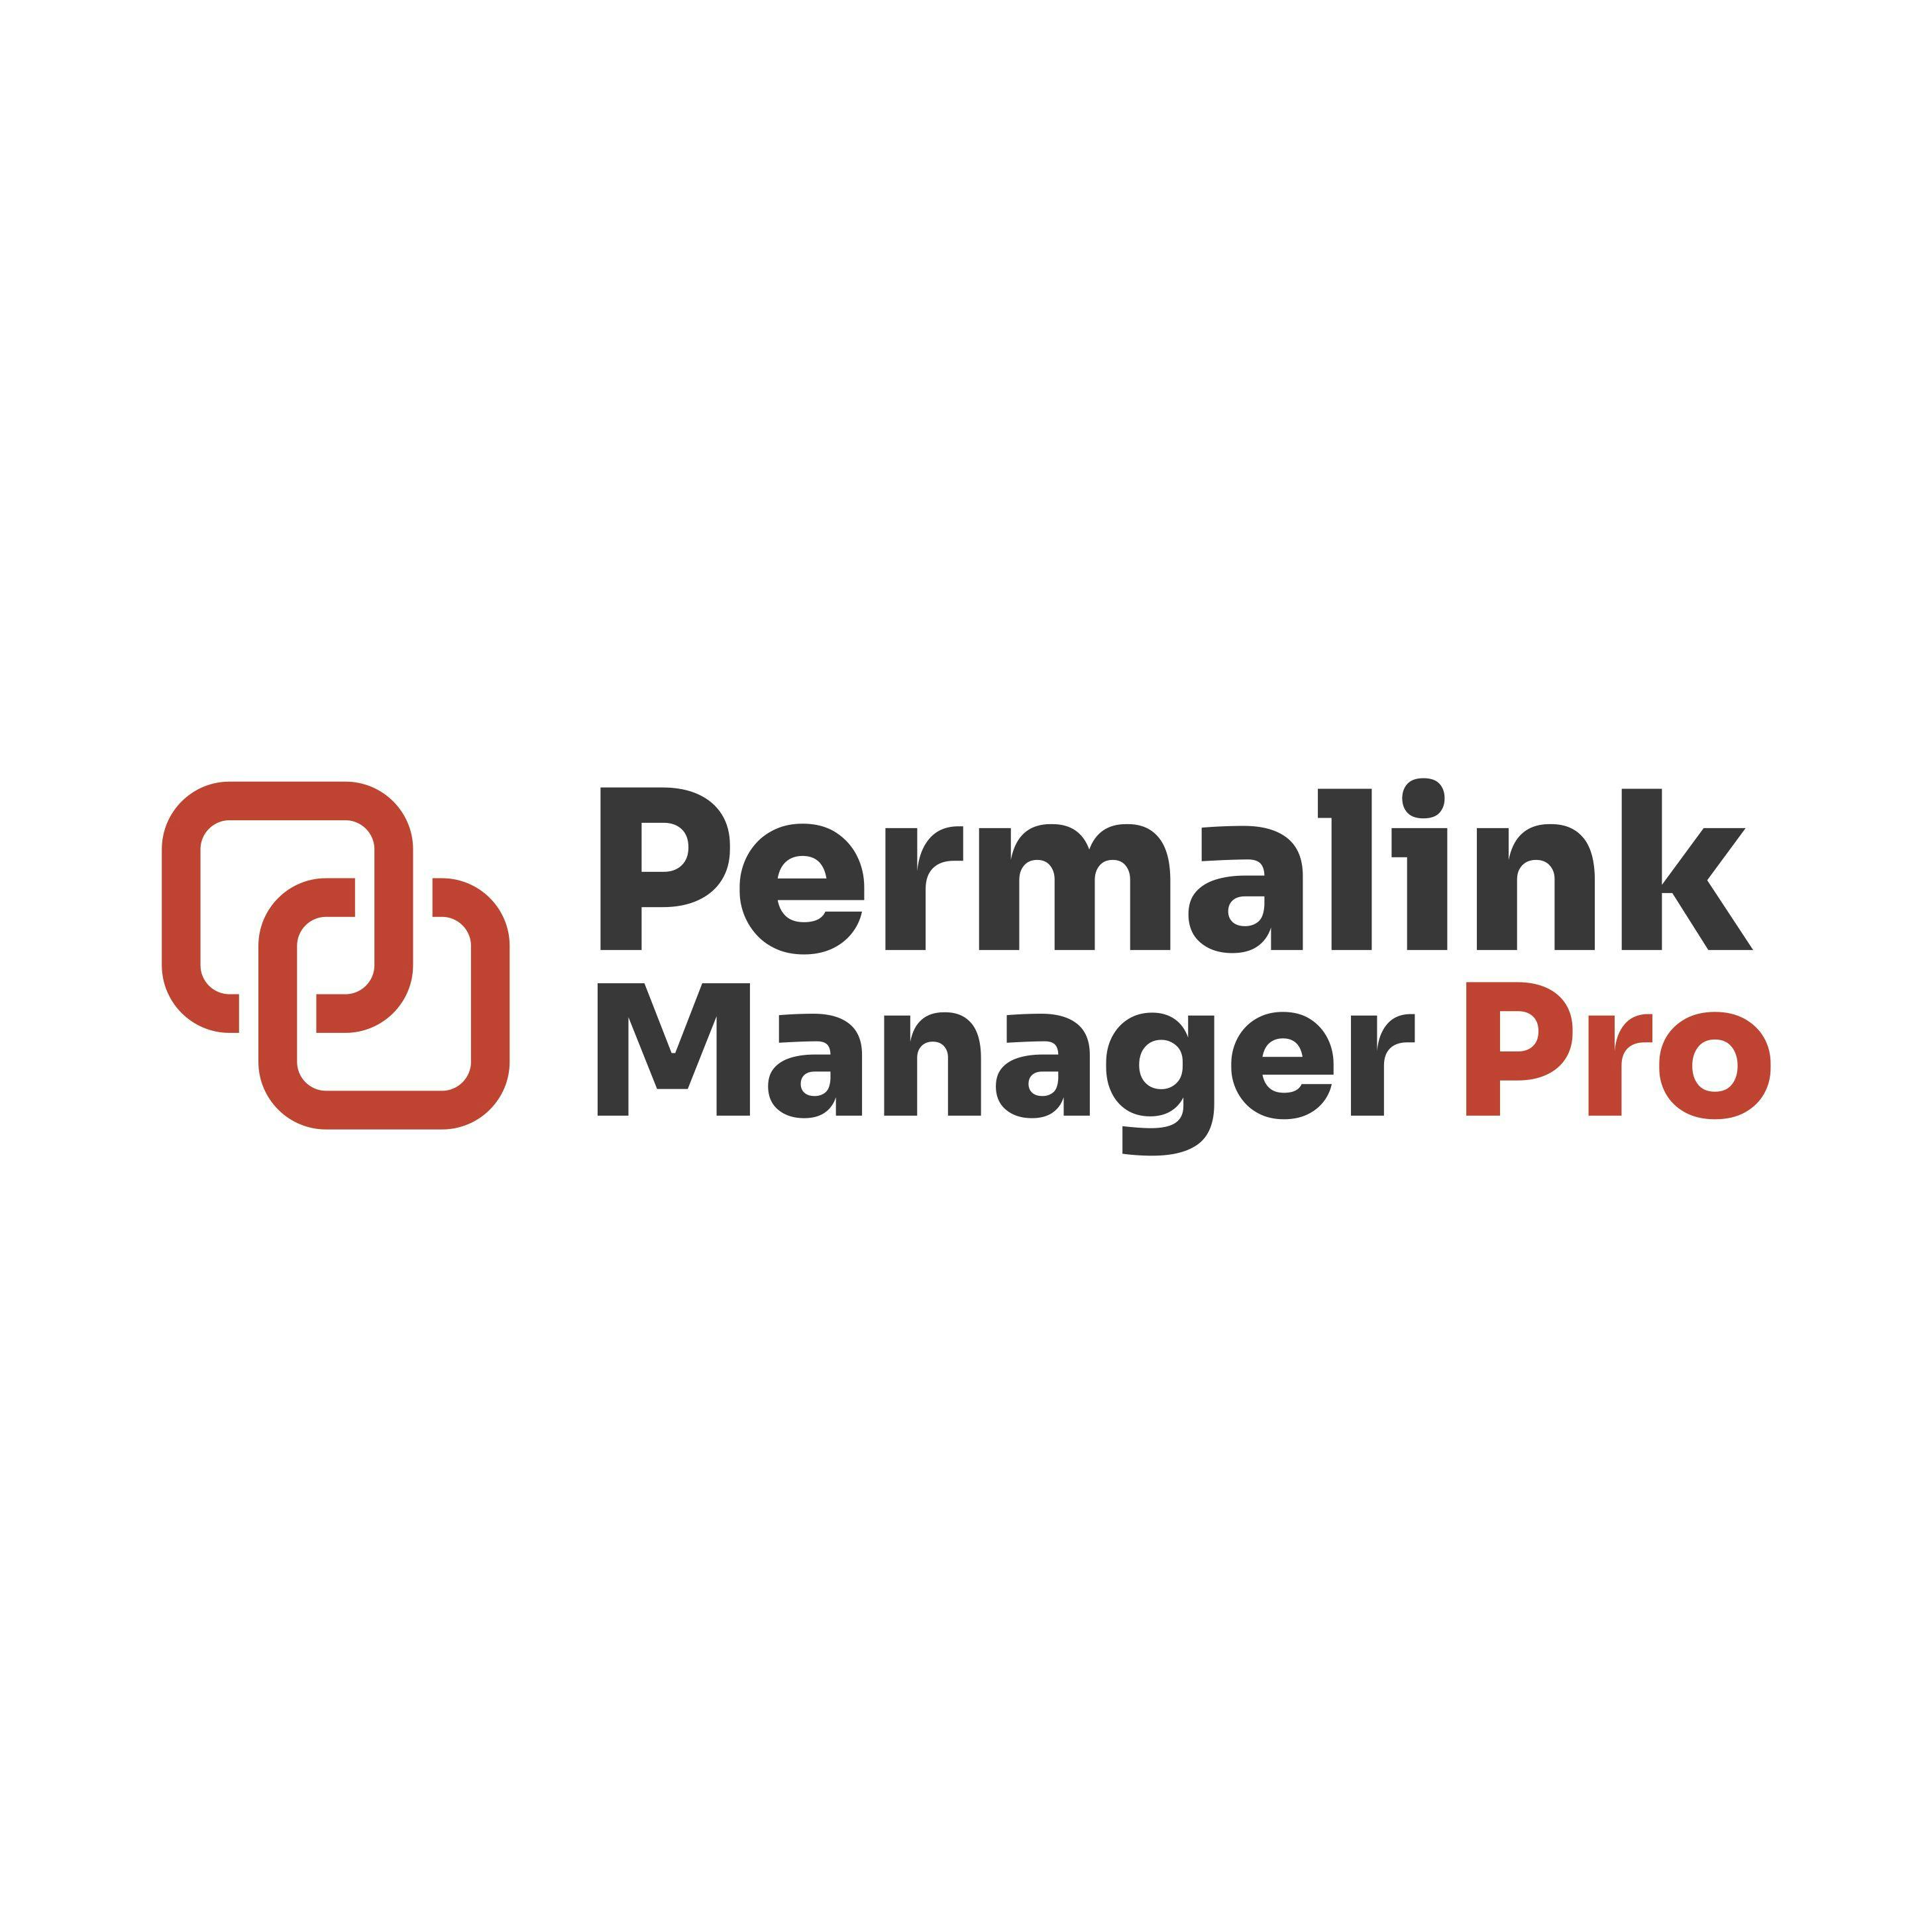 Permalink Manager Pro HackerNoon profile picture